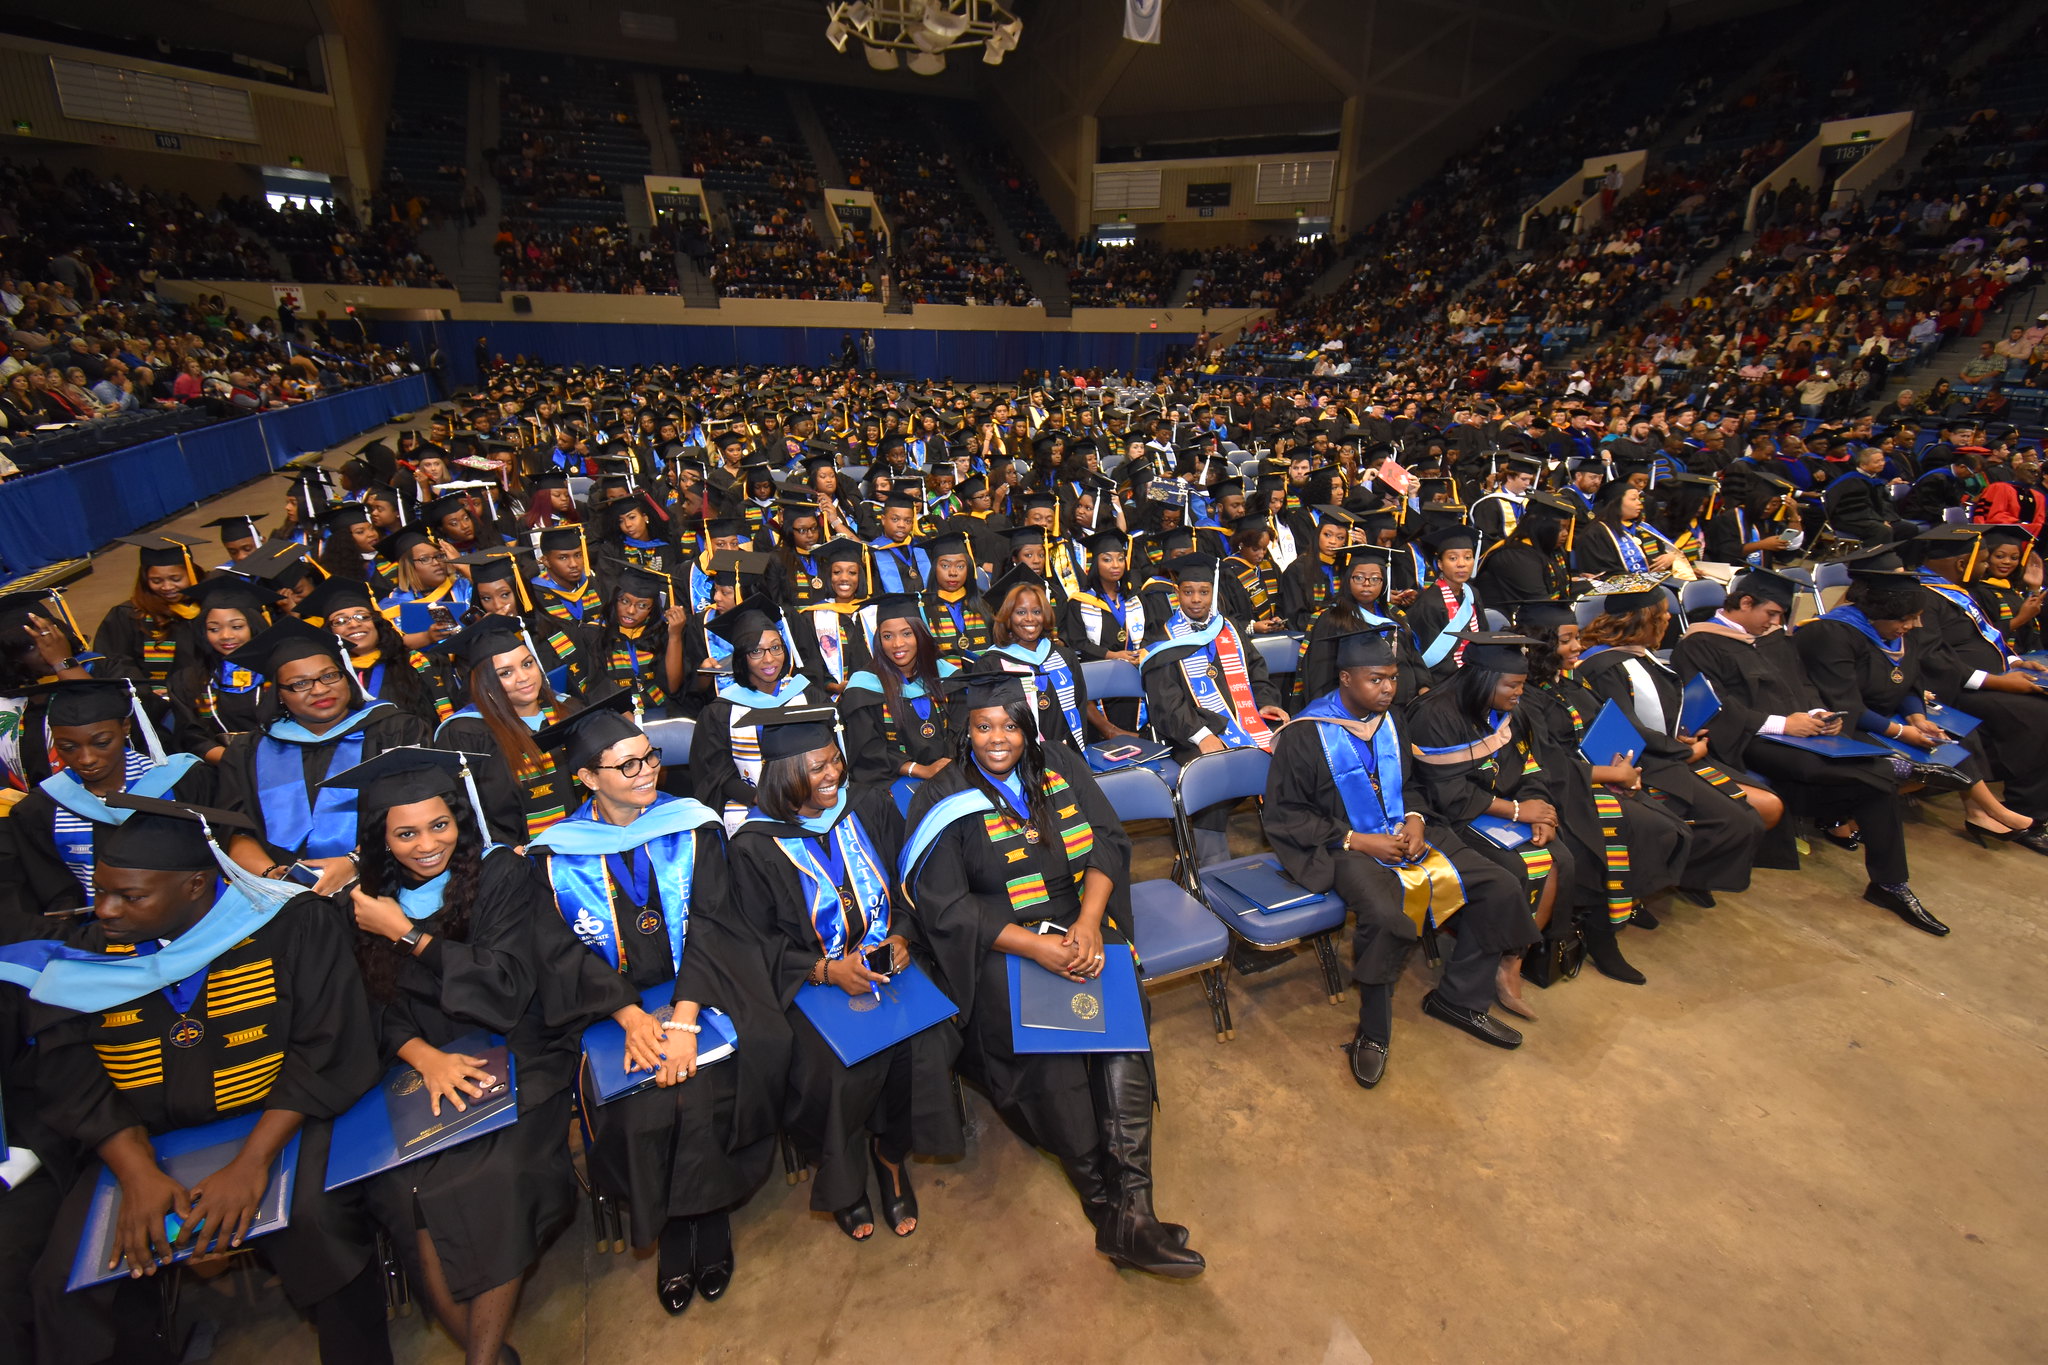 albany-state-university-2019-spring-commencement-to-be-held-may-11